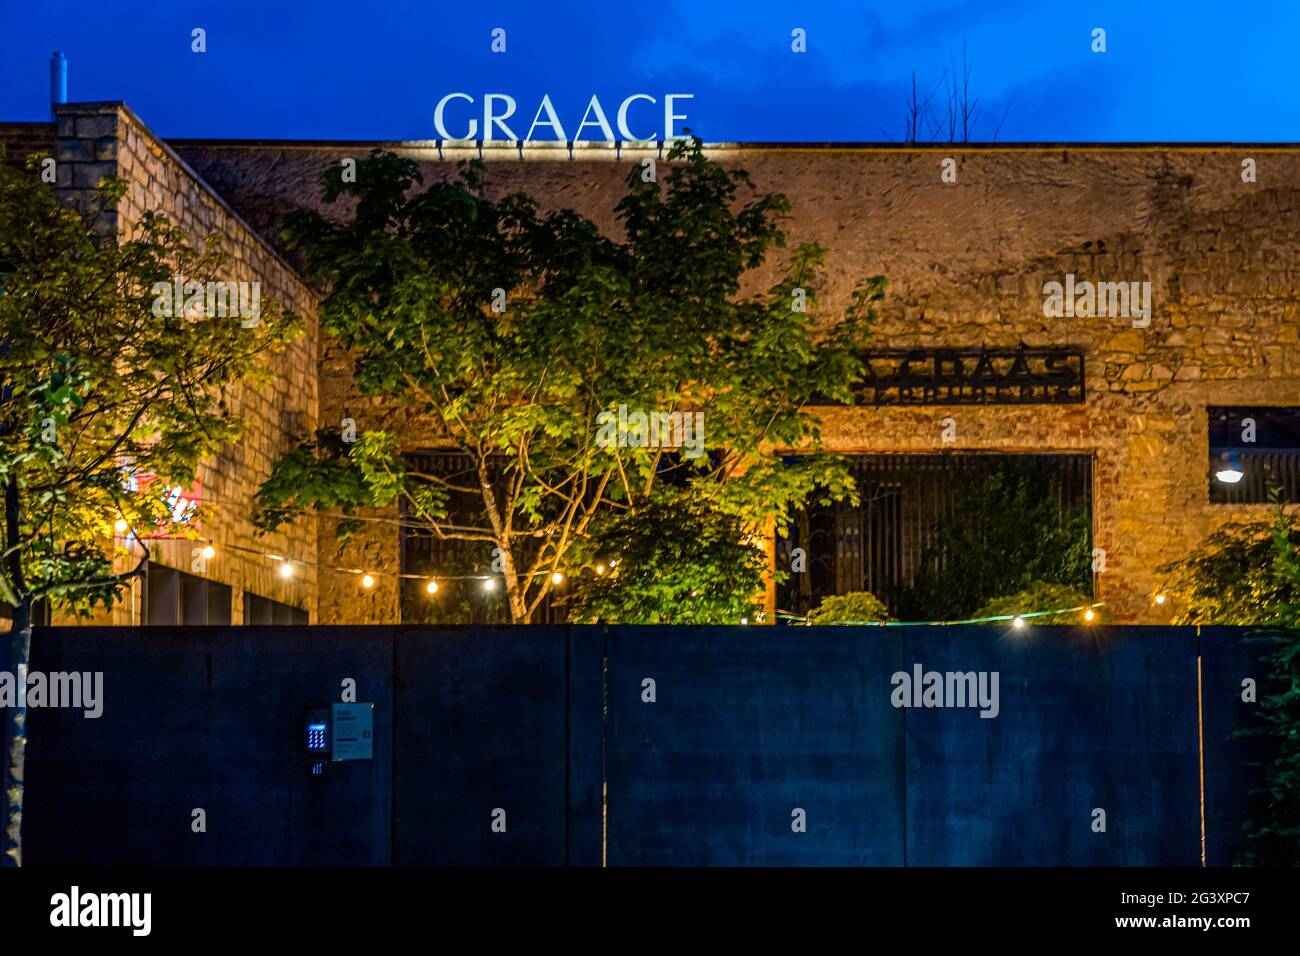 Graace Hotel in Luxembourg Stock Photo